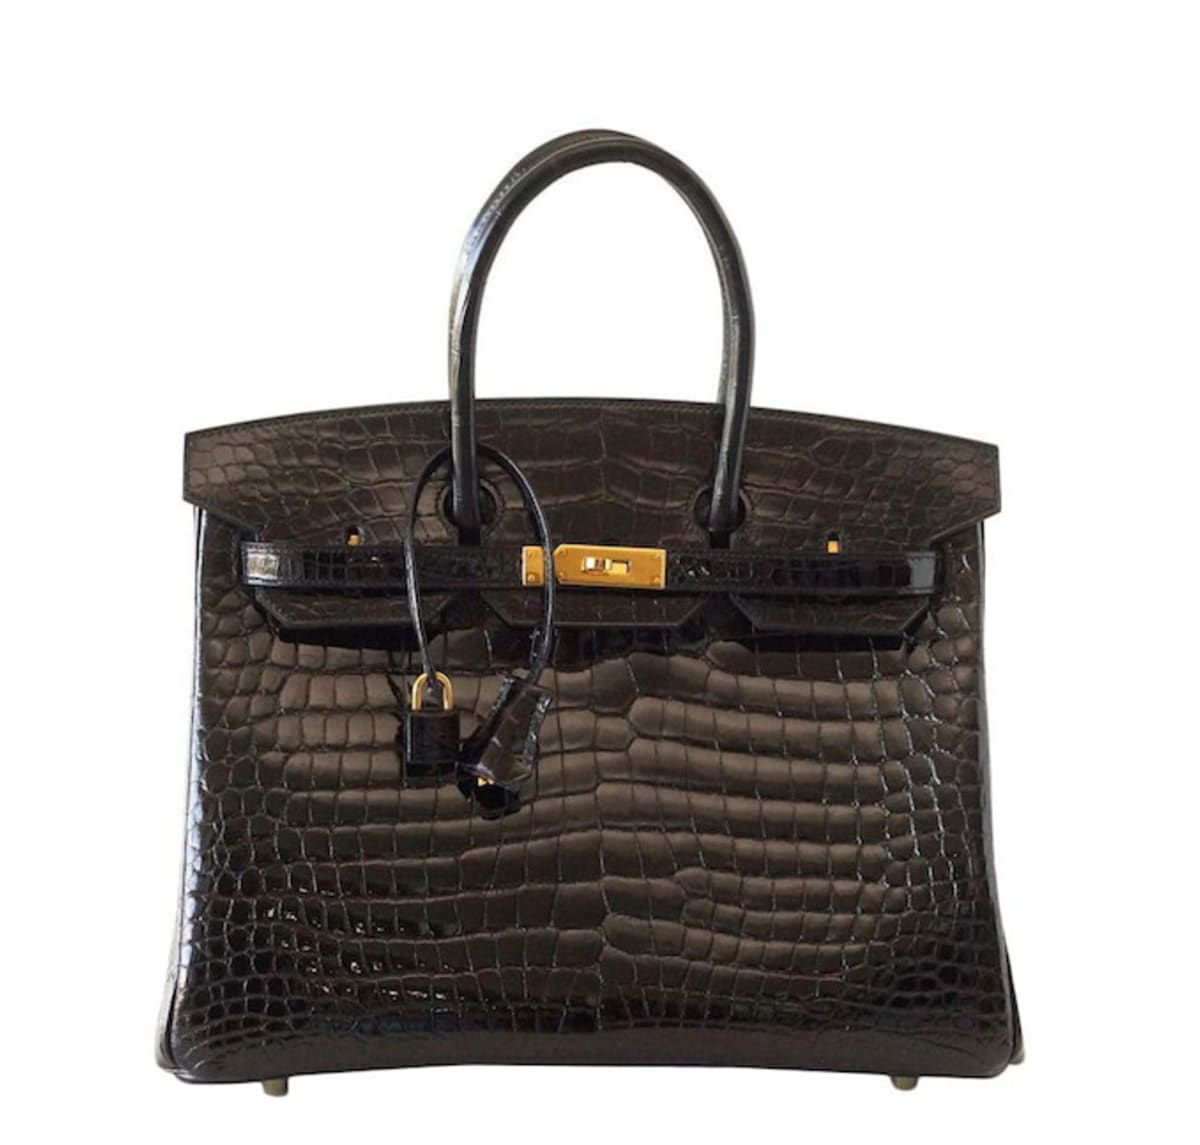 Hermès May Drop &quot;Birkin&quot; from Birkin Bag Over Animal-Rights Issues | Complex